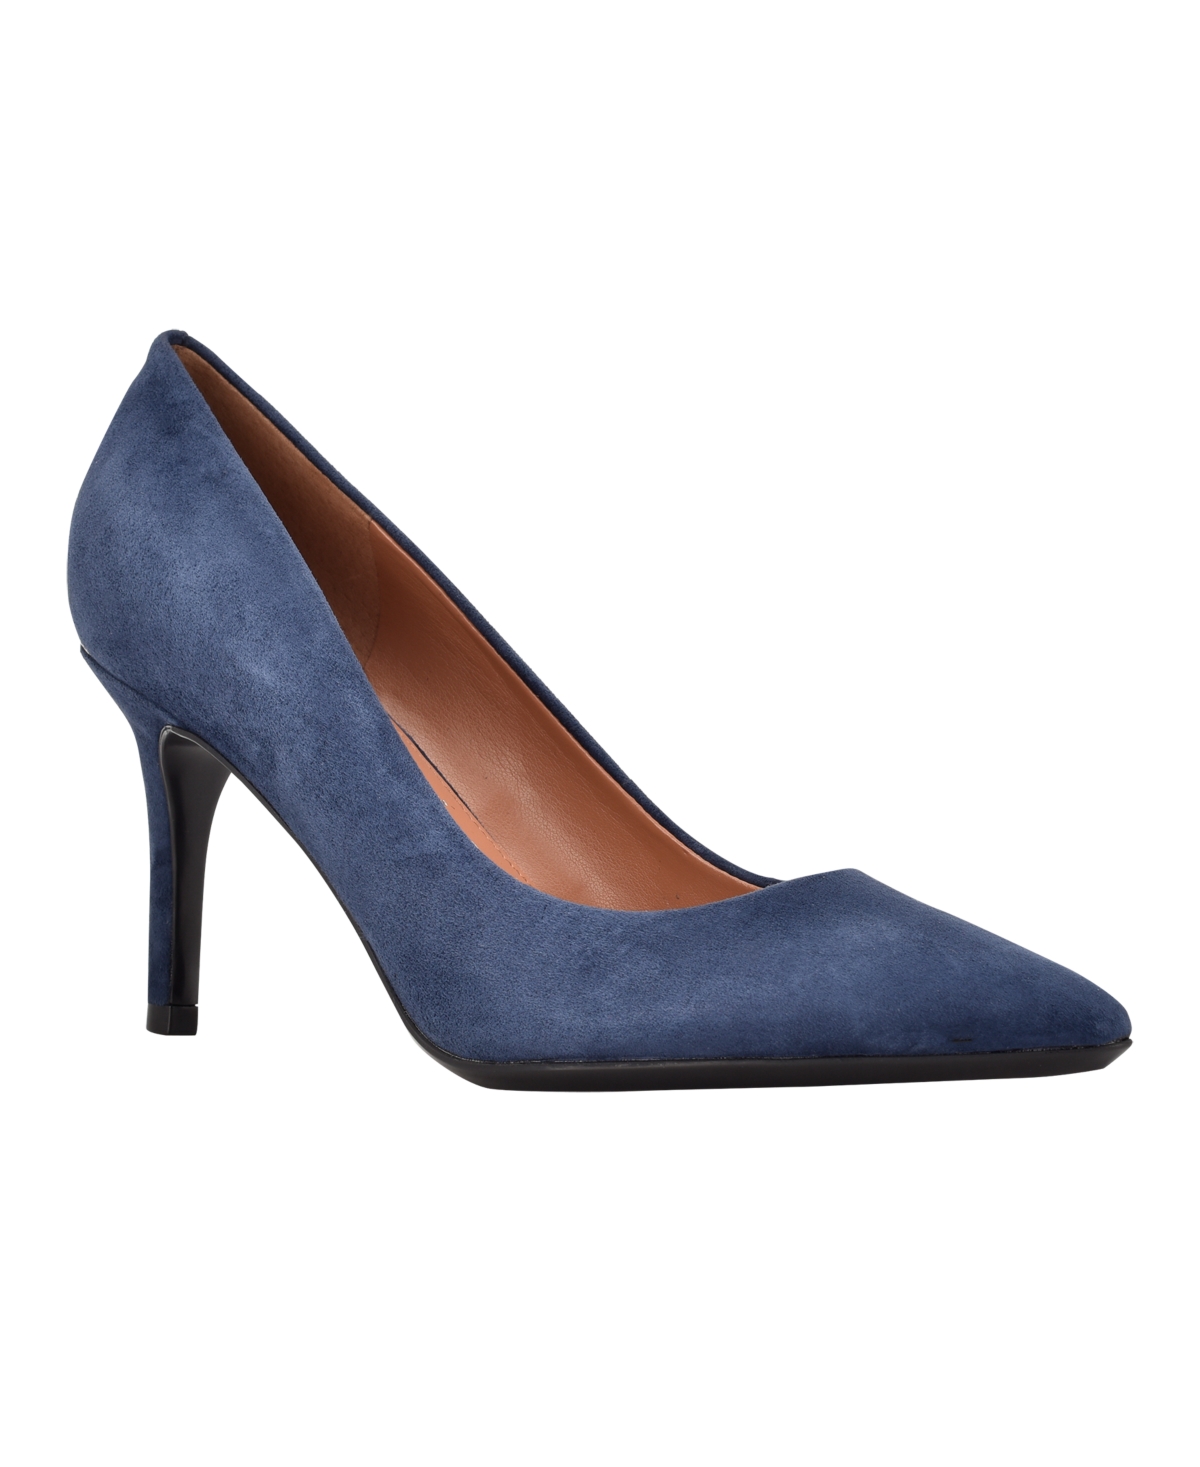 UPC 195972492806 product image for Calvin Klein Women's Gayle Pointy Toe Pumps Women's Shoes | upcitemdb.com